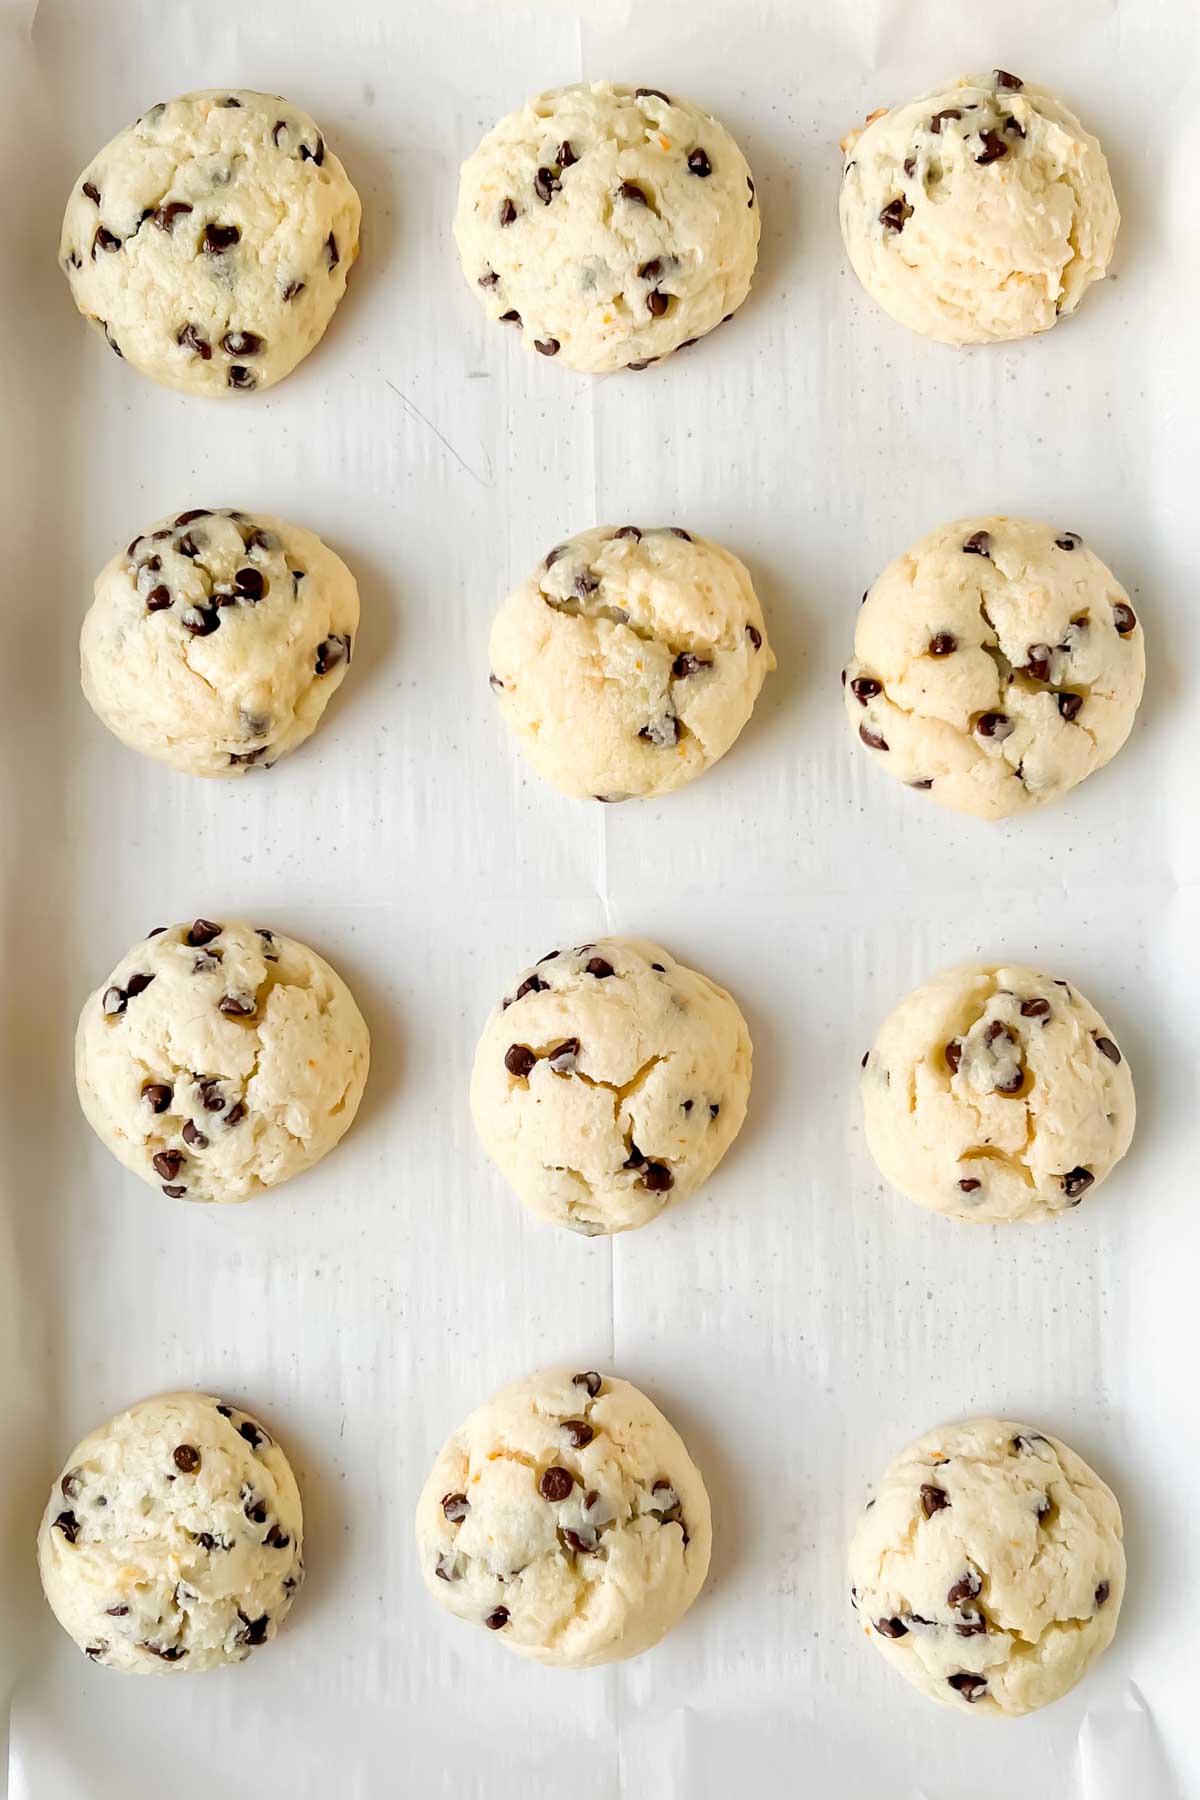 12 ricotta chocolate chip cookie dough balls on parchment lined baking sheet.